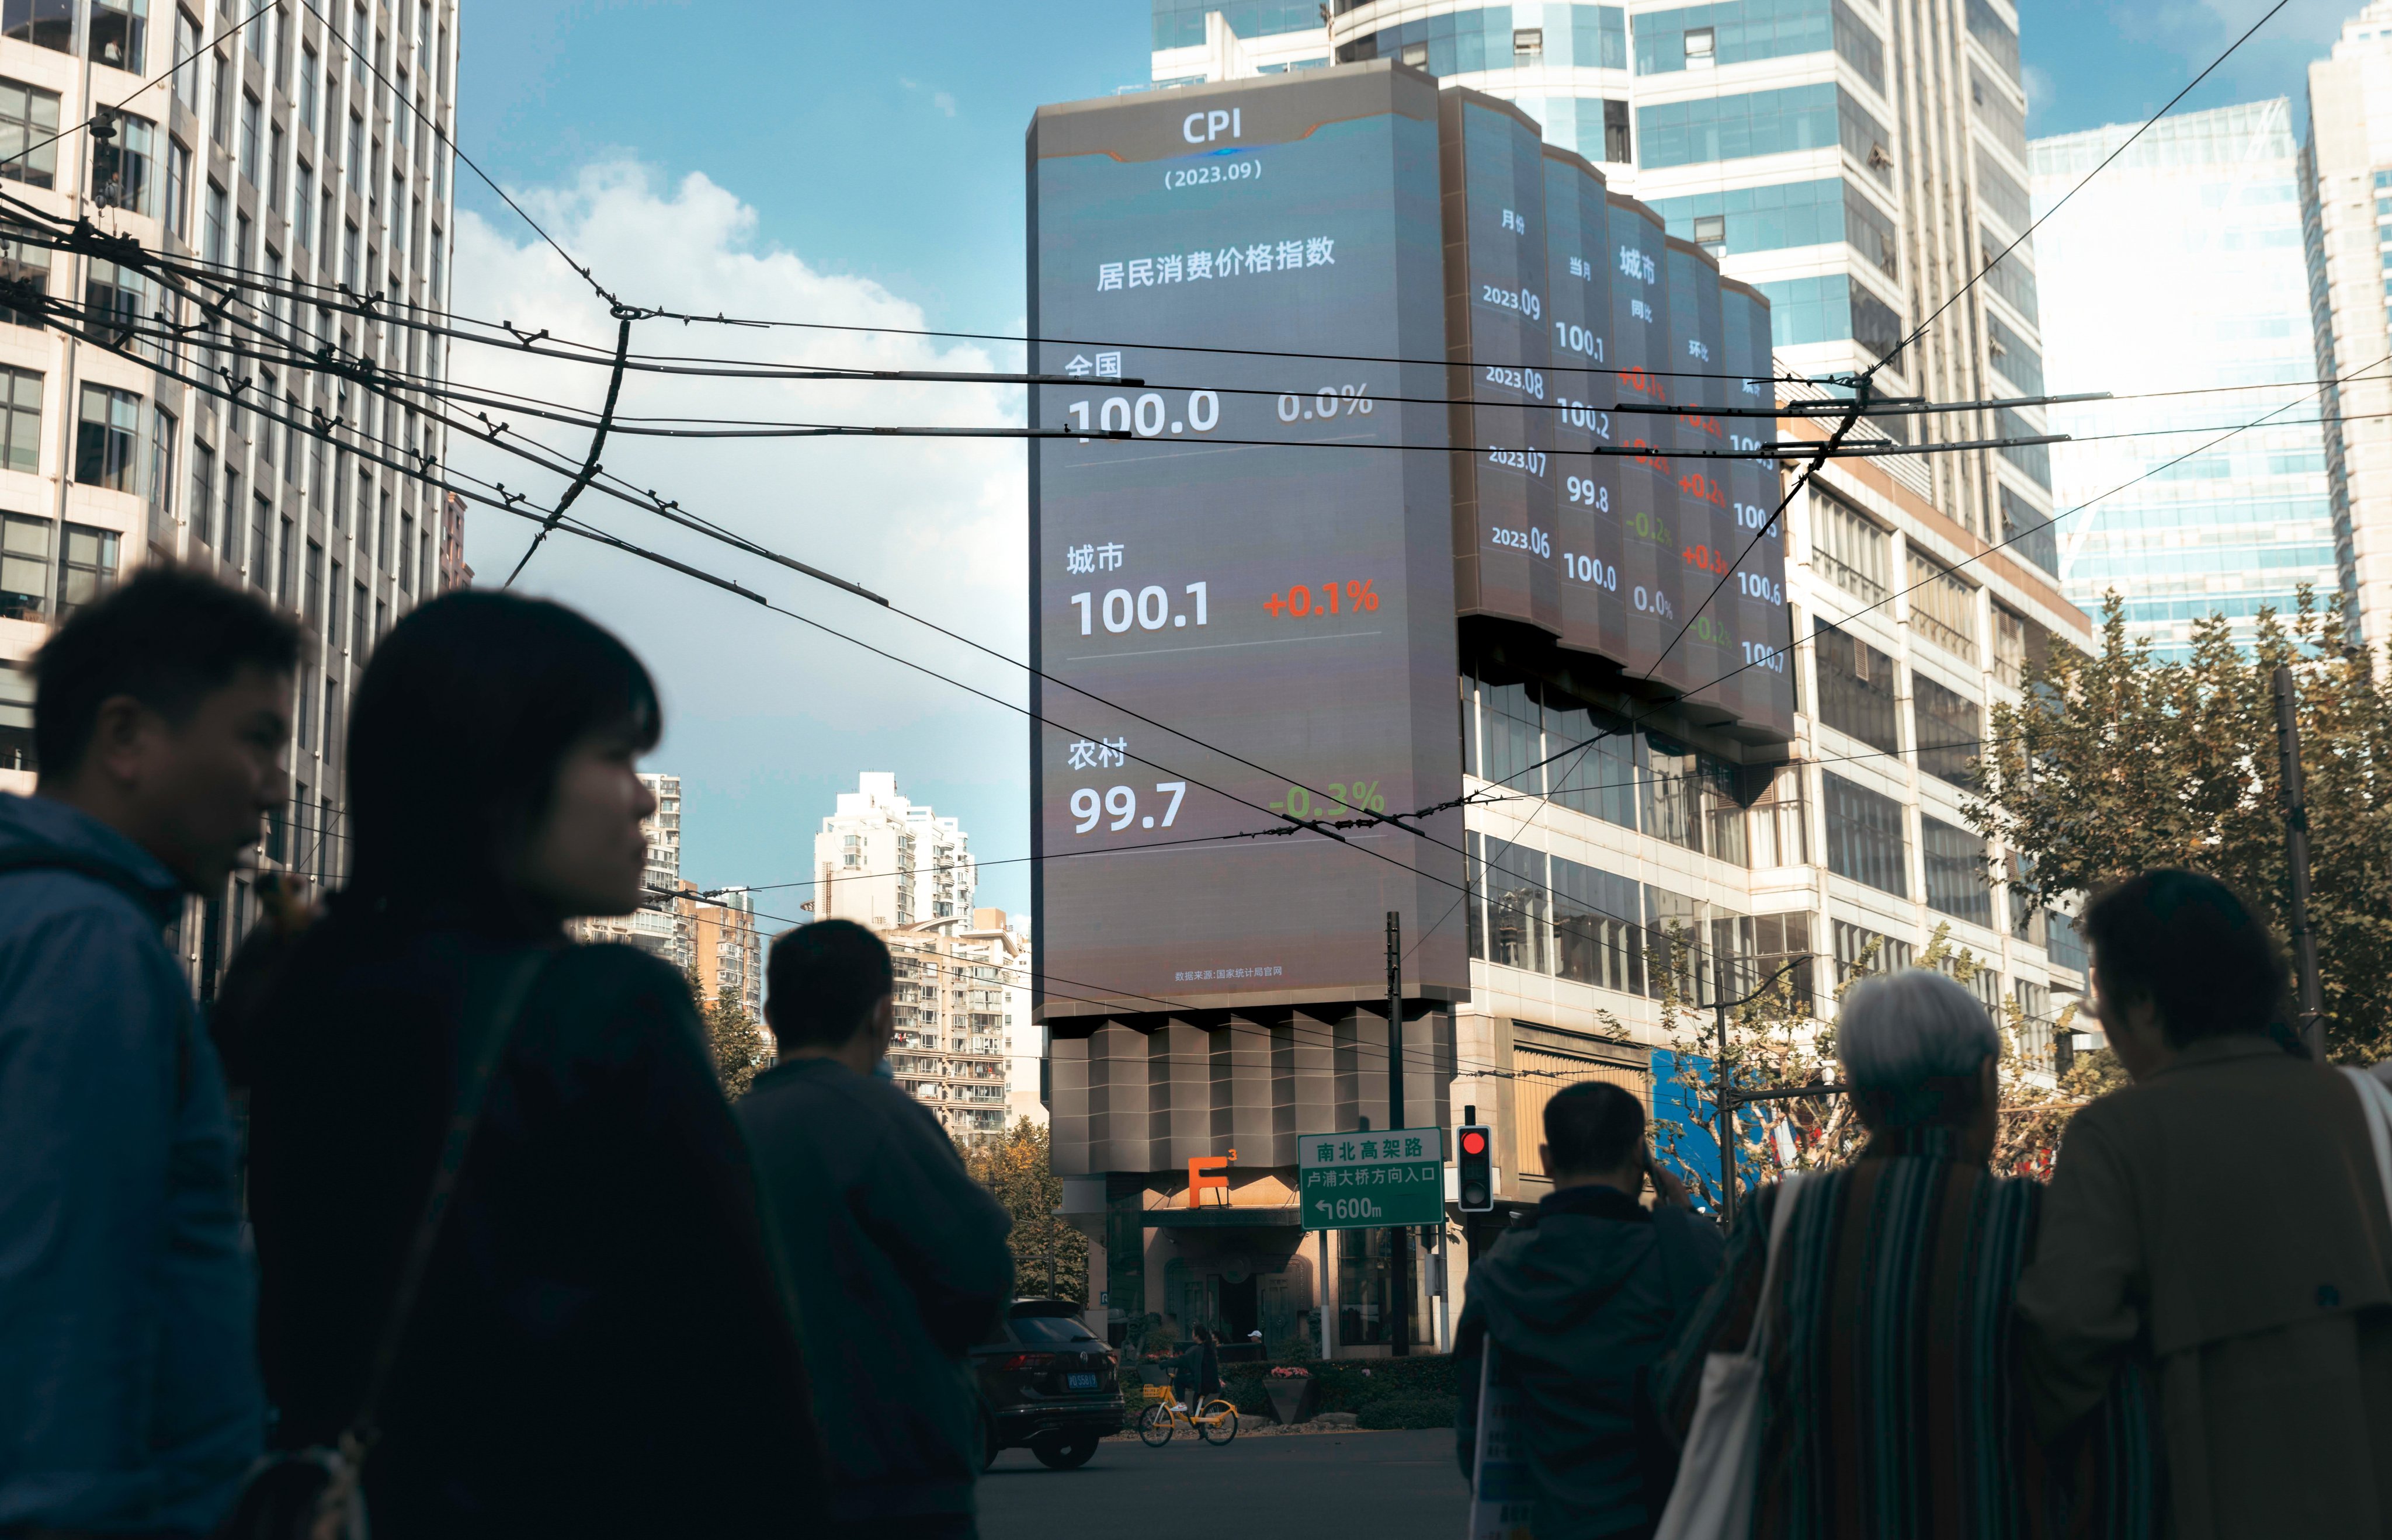 People stand on the street beneath a large screen showing the latest market and economic data, in Shanghai on October 20. Photo: EPA-EFE